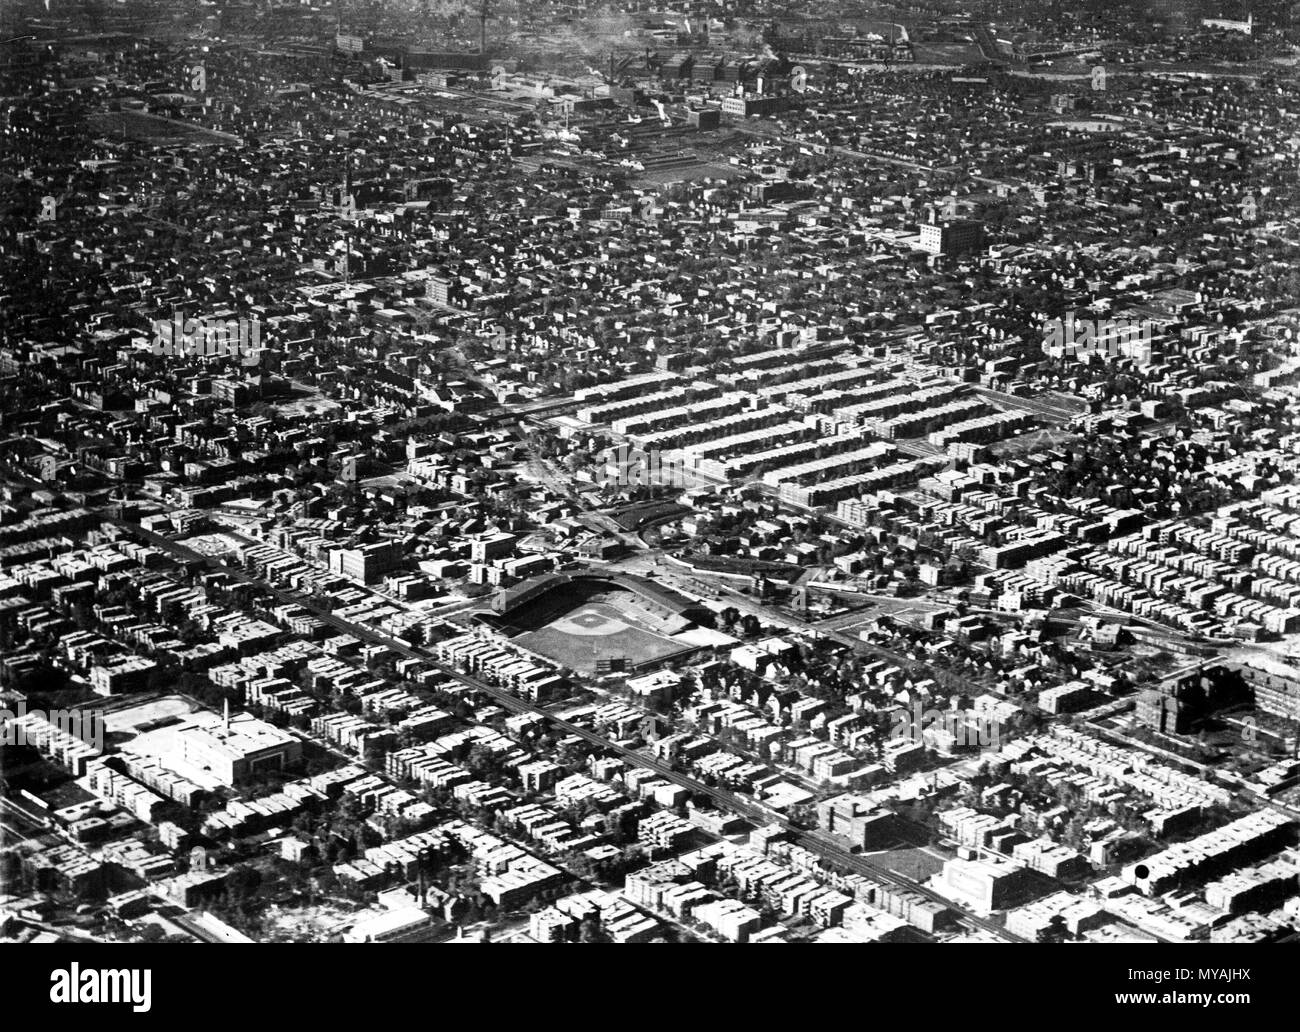 Aerial View Of Wrigley Field With Chicago, Illinois Skyline In